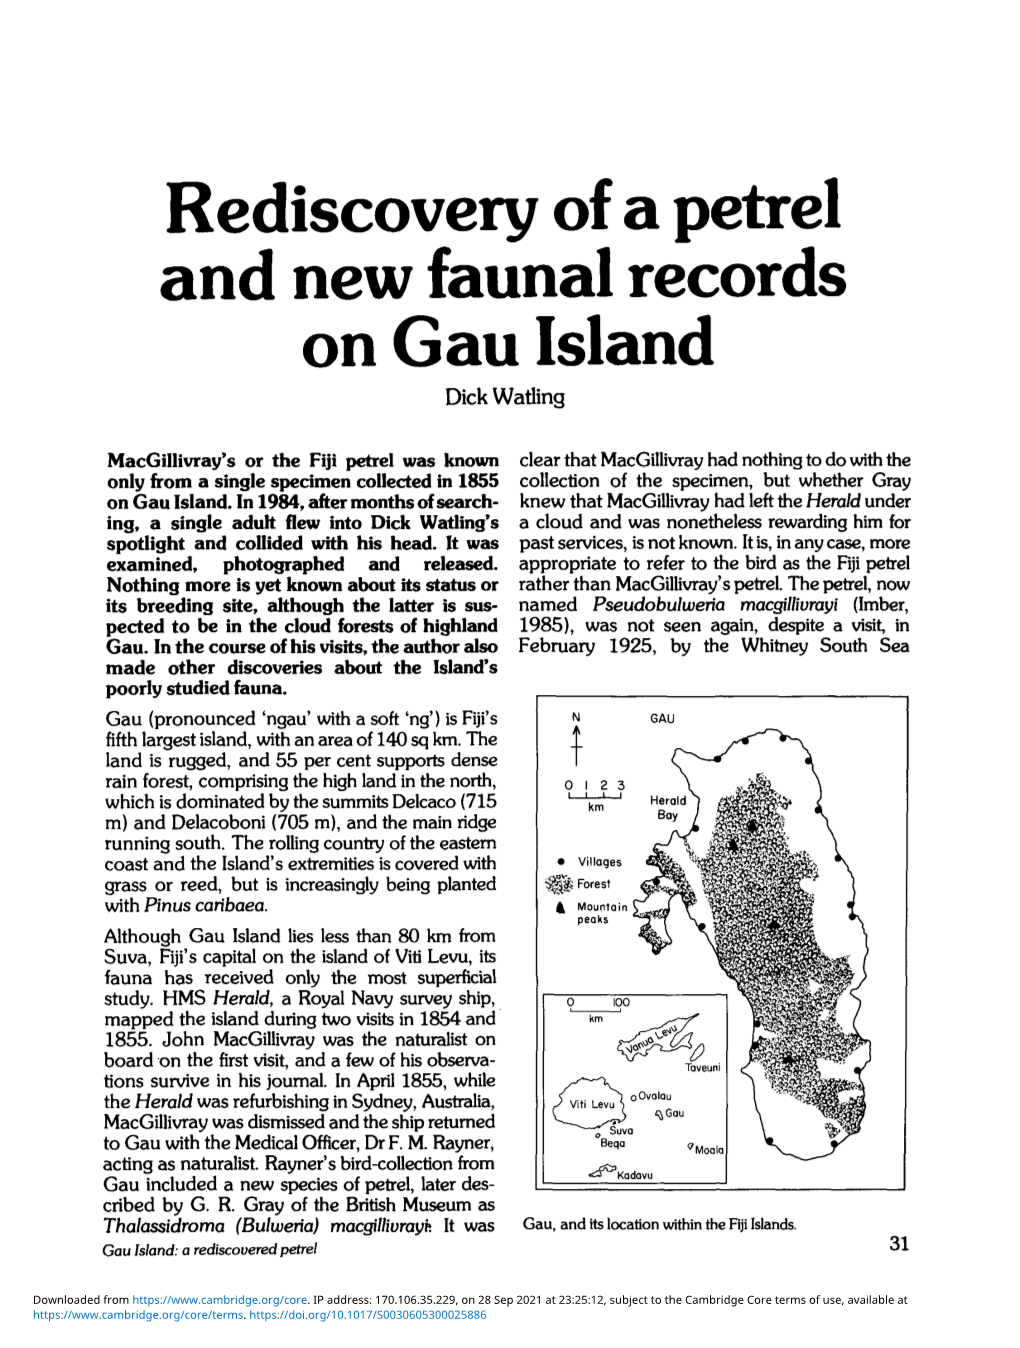 Rediscovery of a Petrel and New Faunal Records on Gau Island Dick Waiting